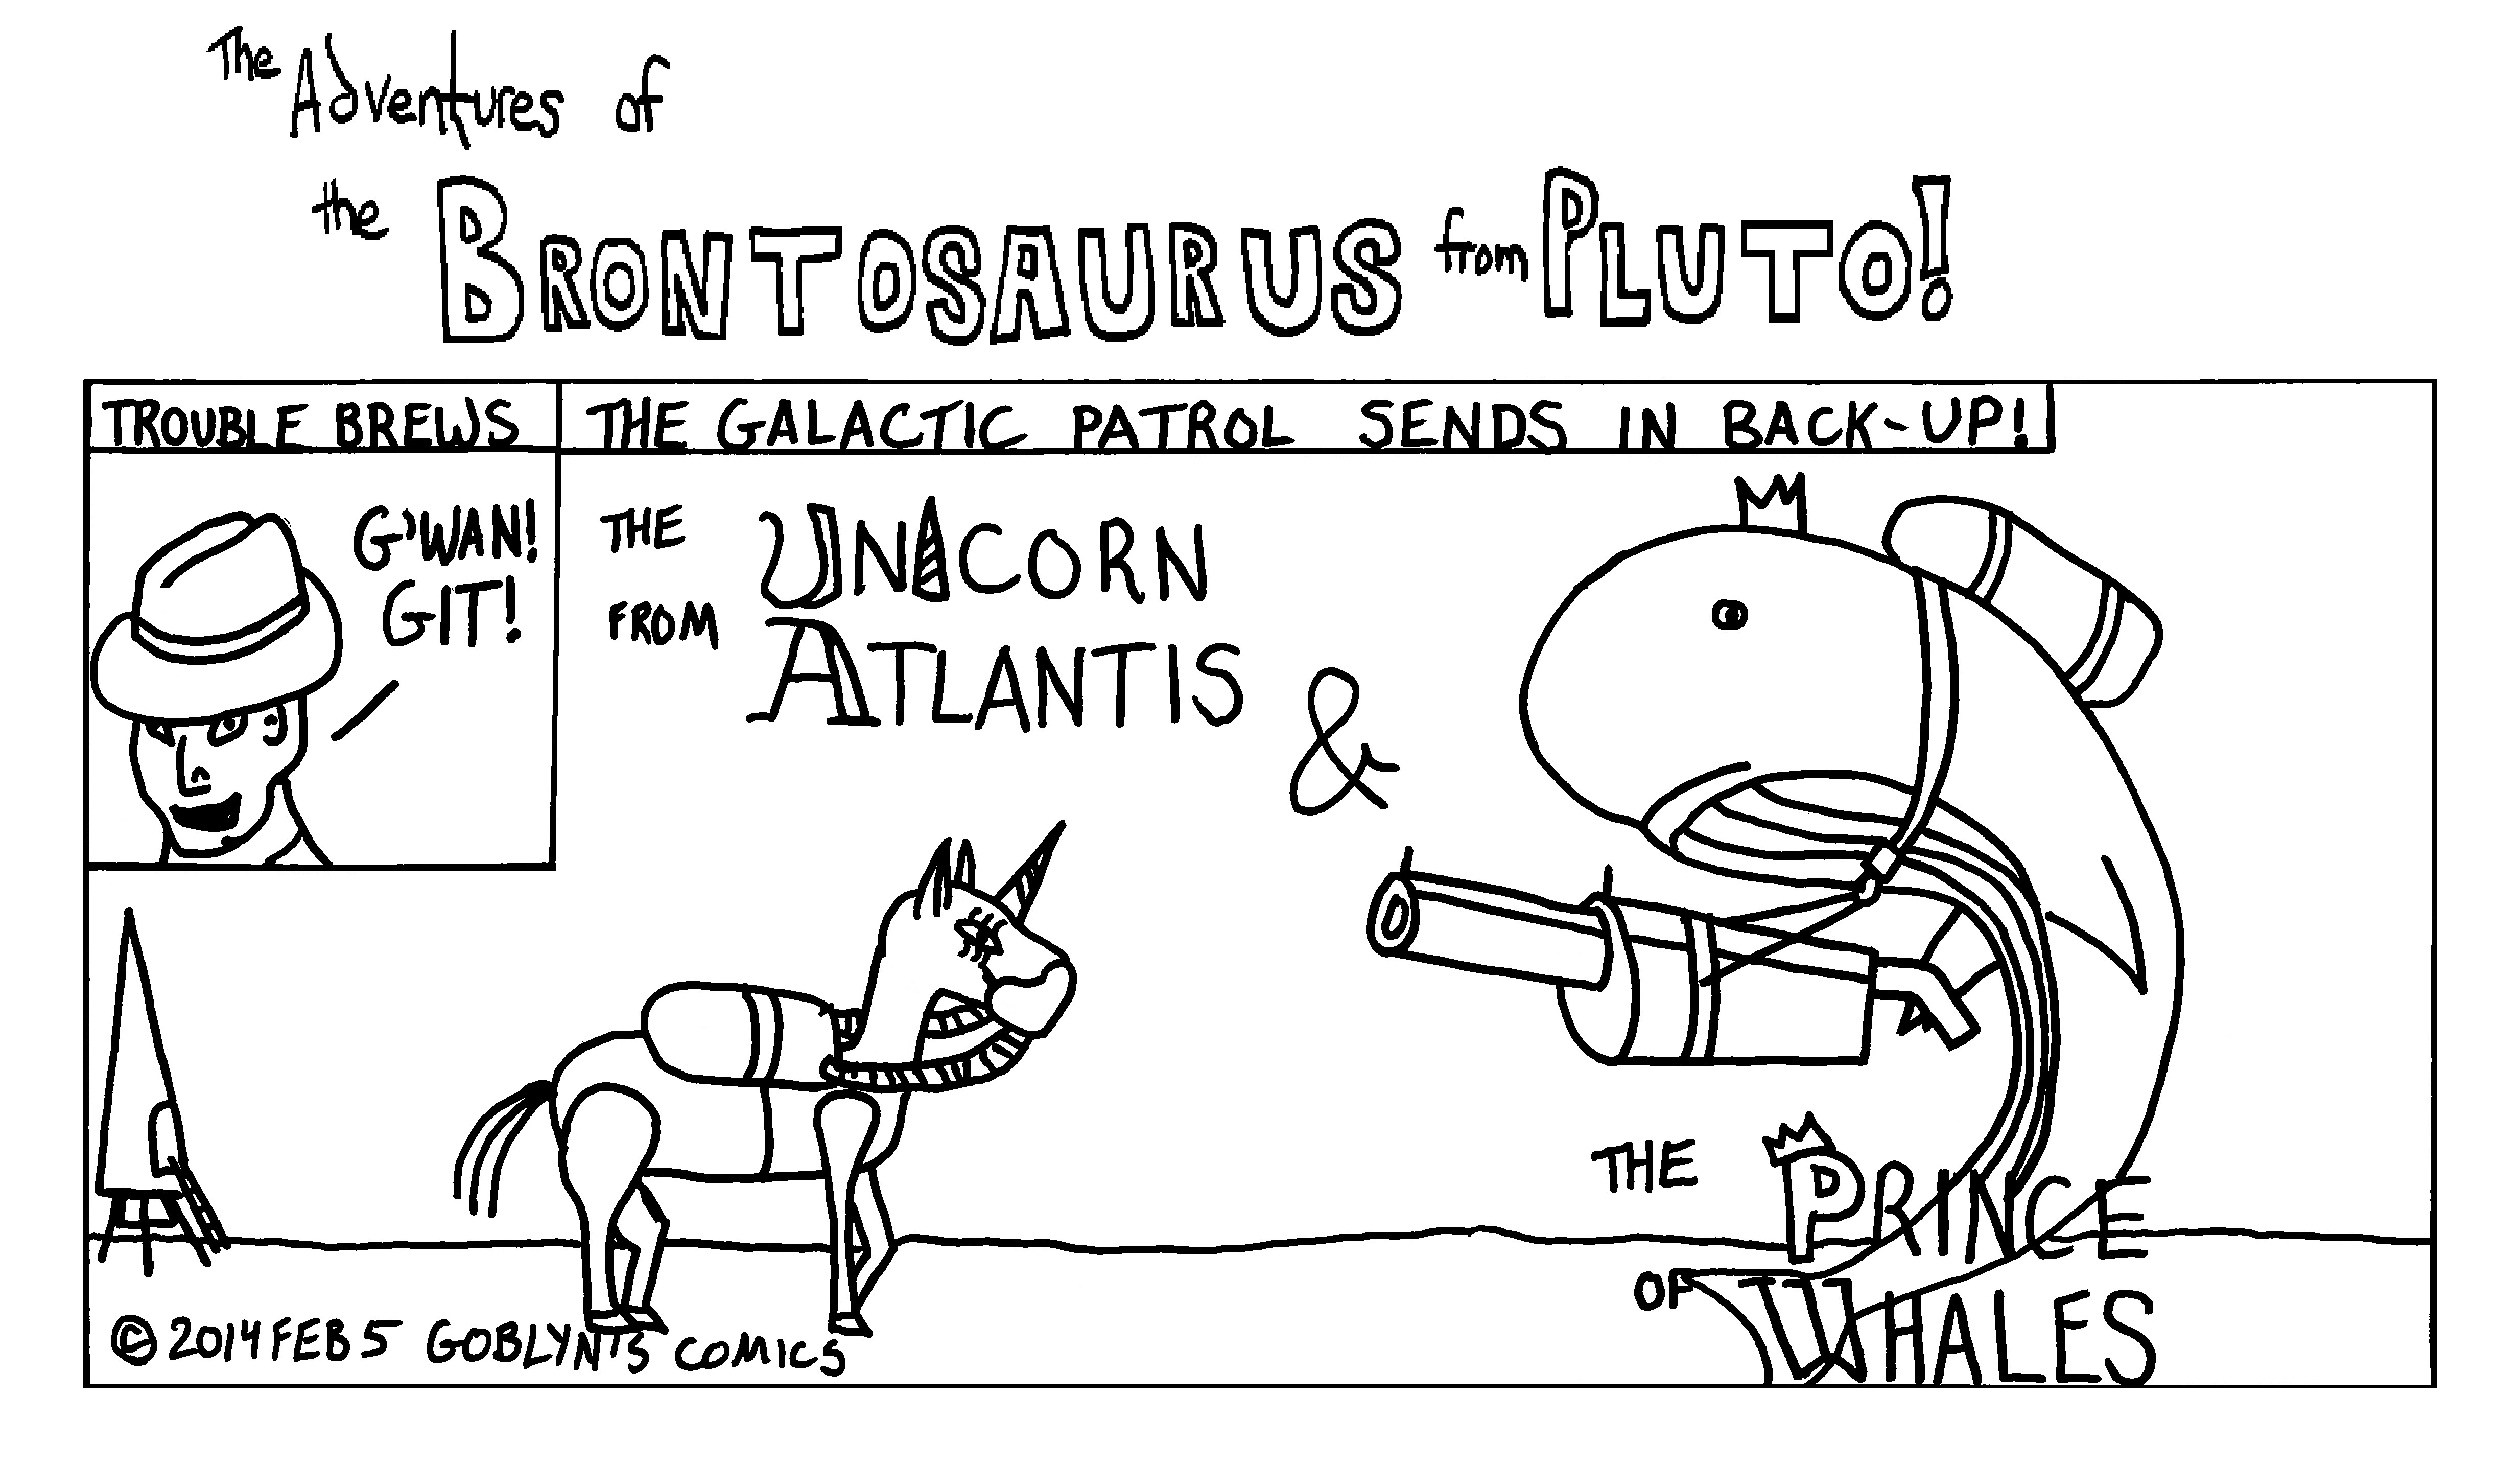 The Brontosaurus from Pluto - The Galactic Patrol sends back-up: the Unicorn from Atlantis and the Prince of Whales